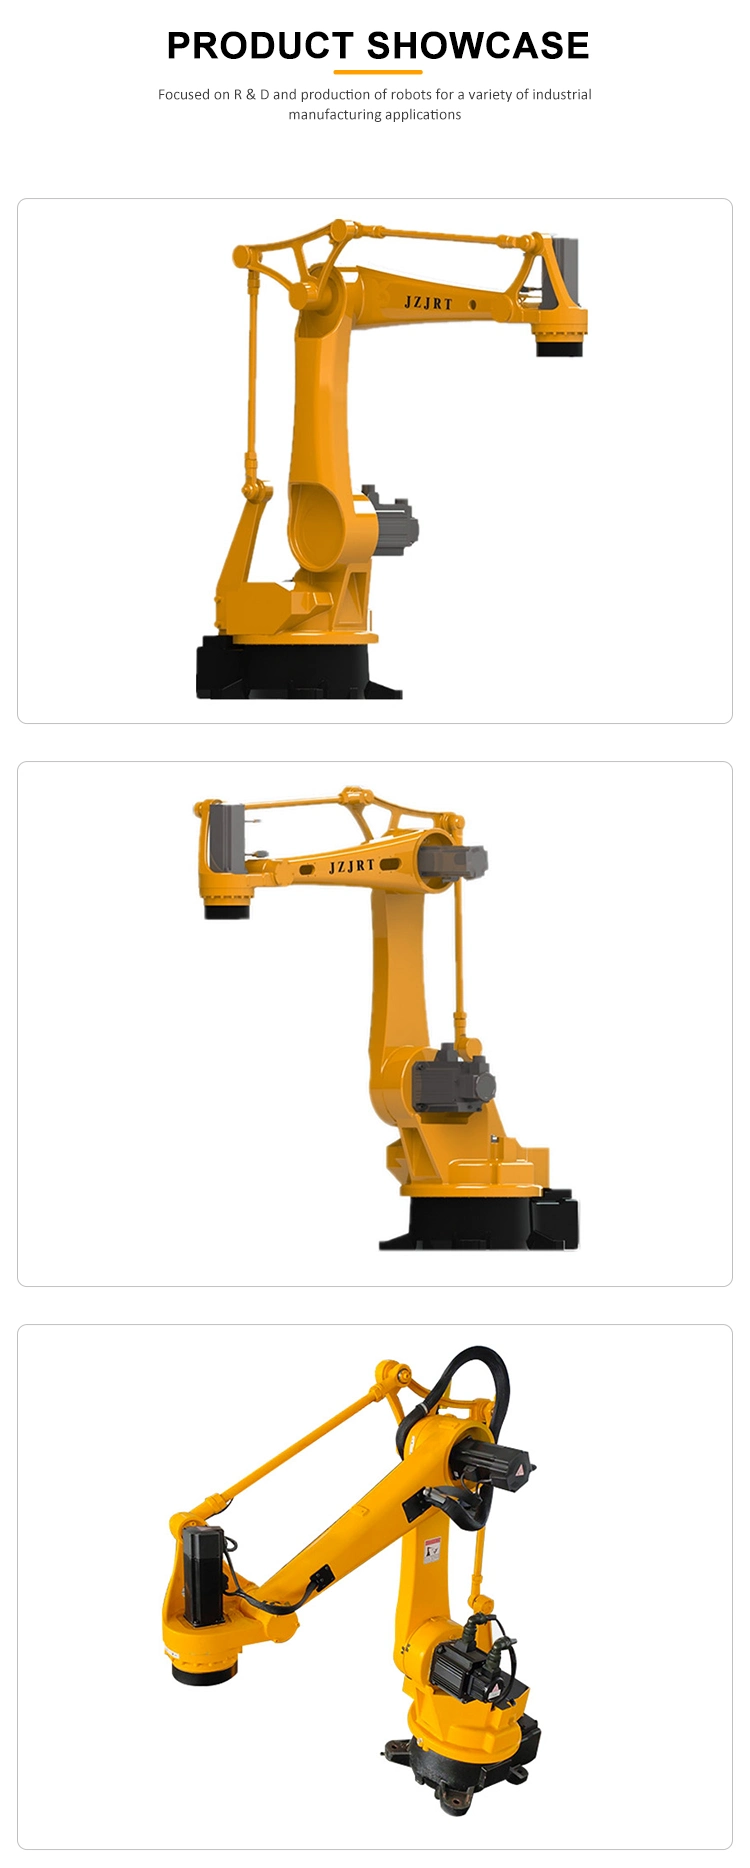 Multiple Joint Robot 6 Dof Palletizer Polishing Painting Manipulator Arm Robot for Good Price with Low Price